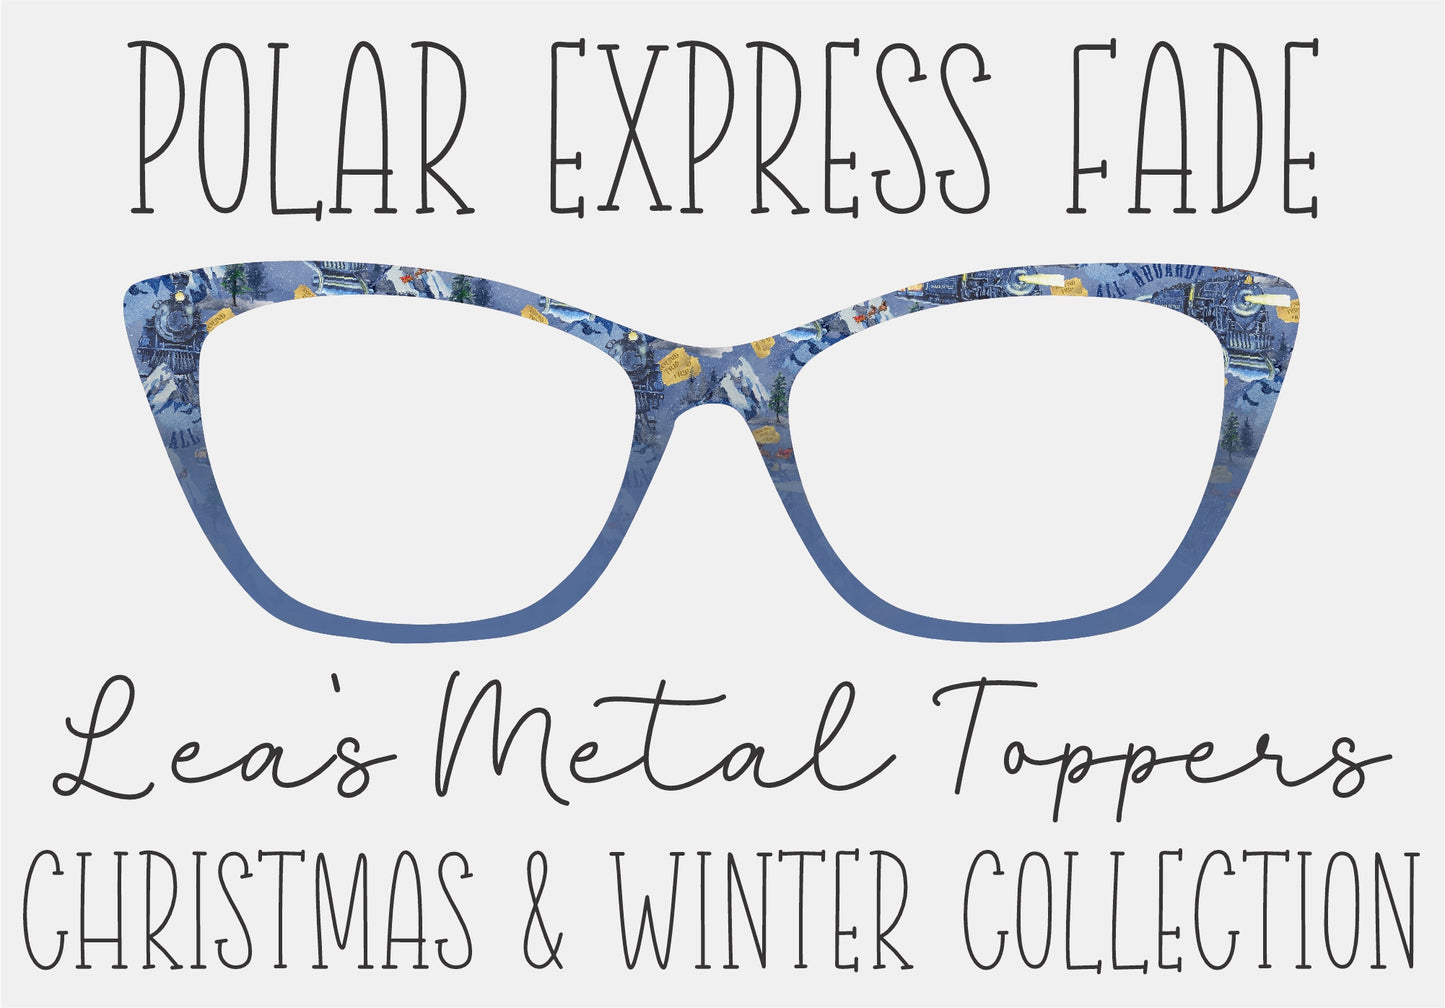 POLAR EXPRESS FADE Eyewear Frame Toppers COMES WITH MAGNETS